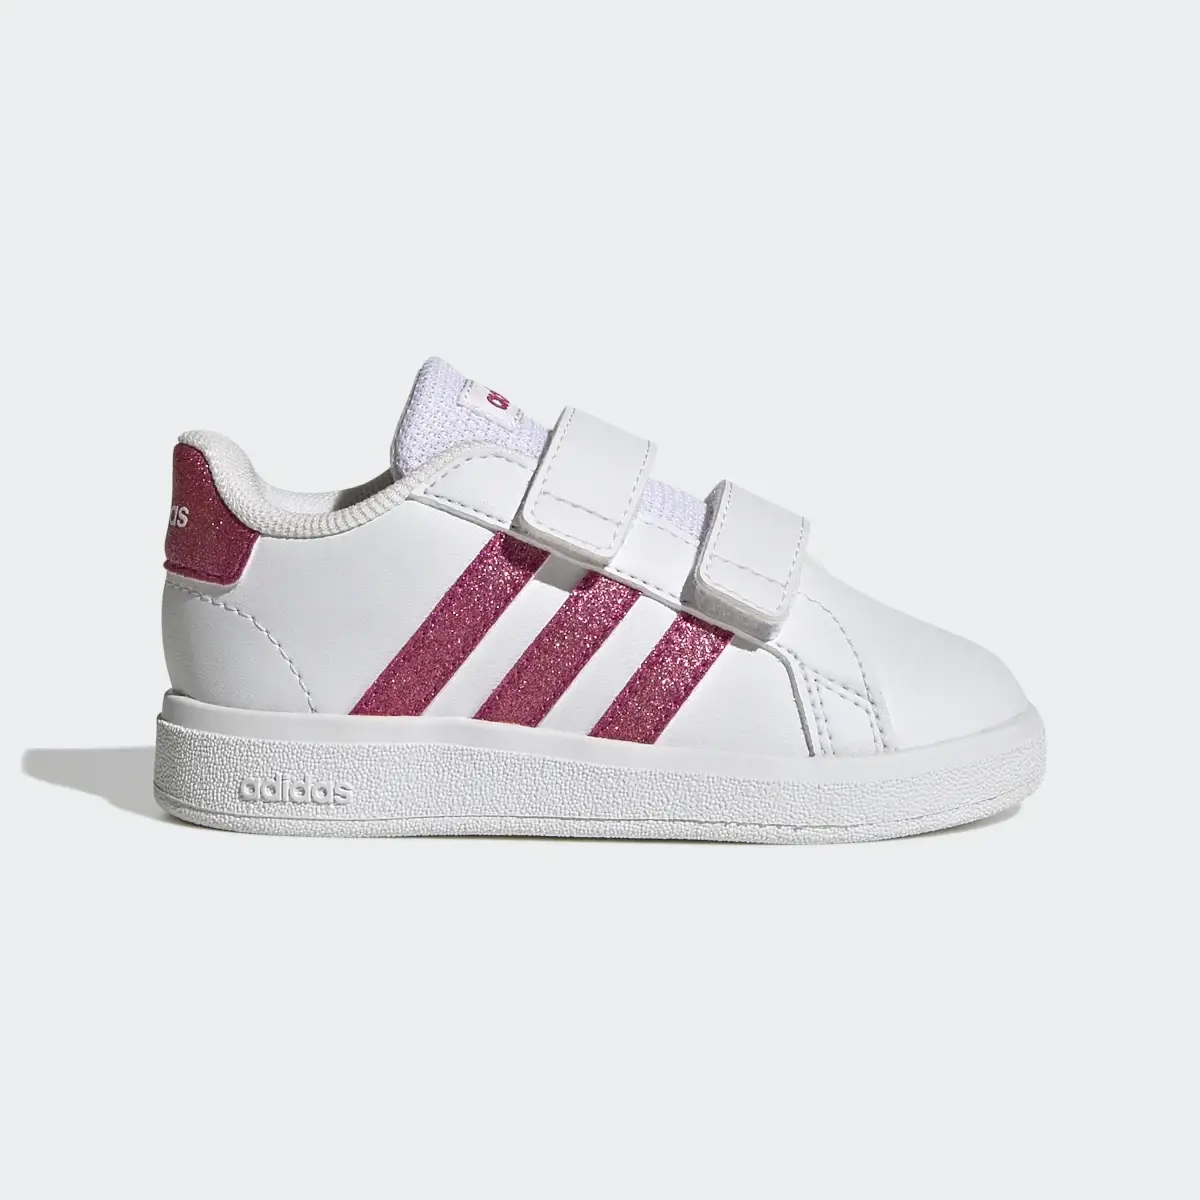 Adidas Grand Court Lifestyle Hook and Loop Shoes. 2